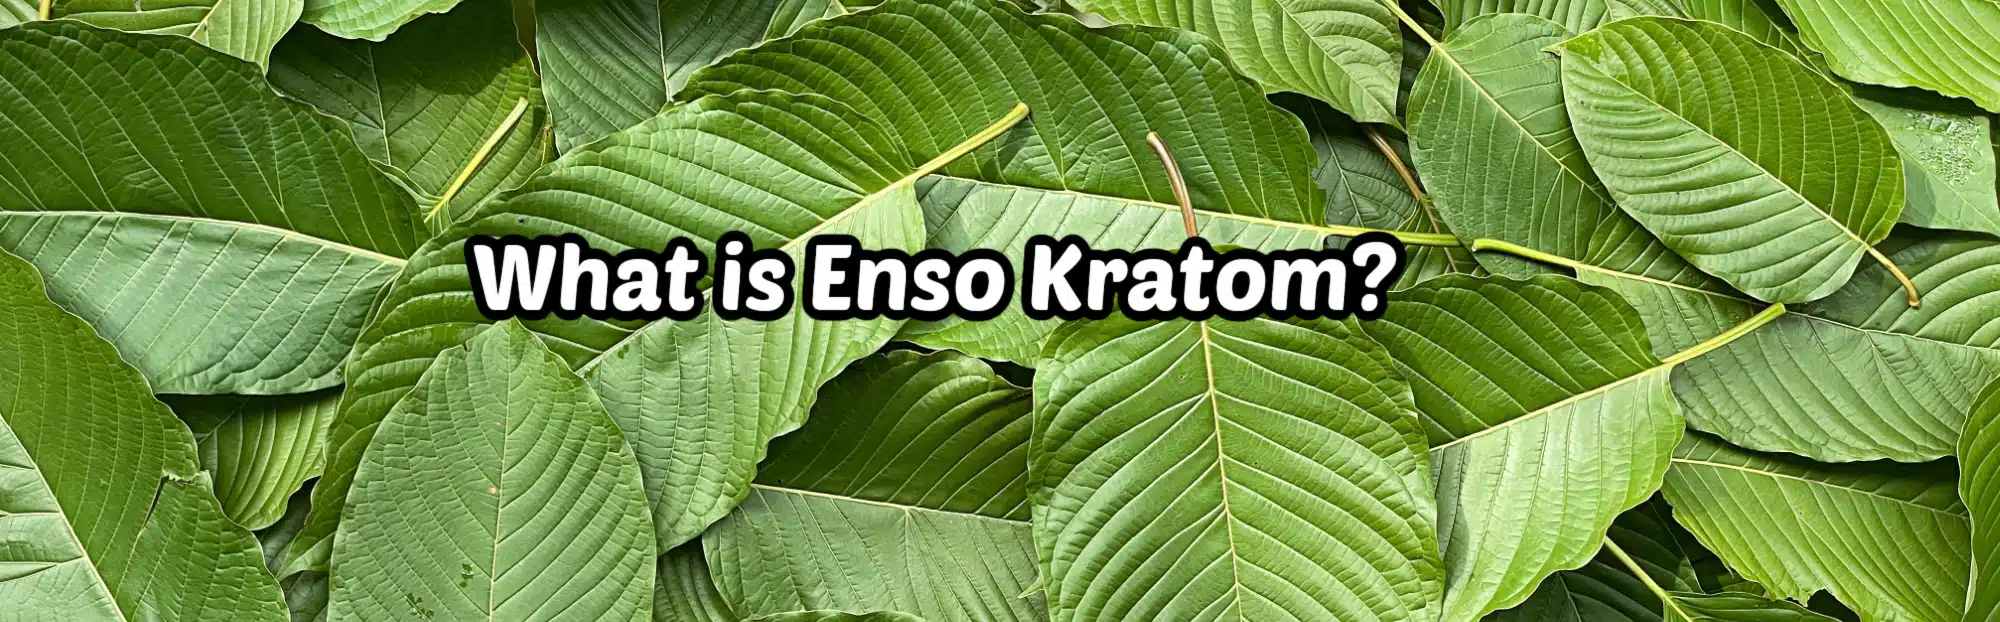 What is enso kratom? banner with green leaves in background